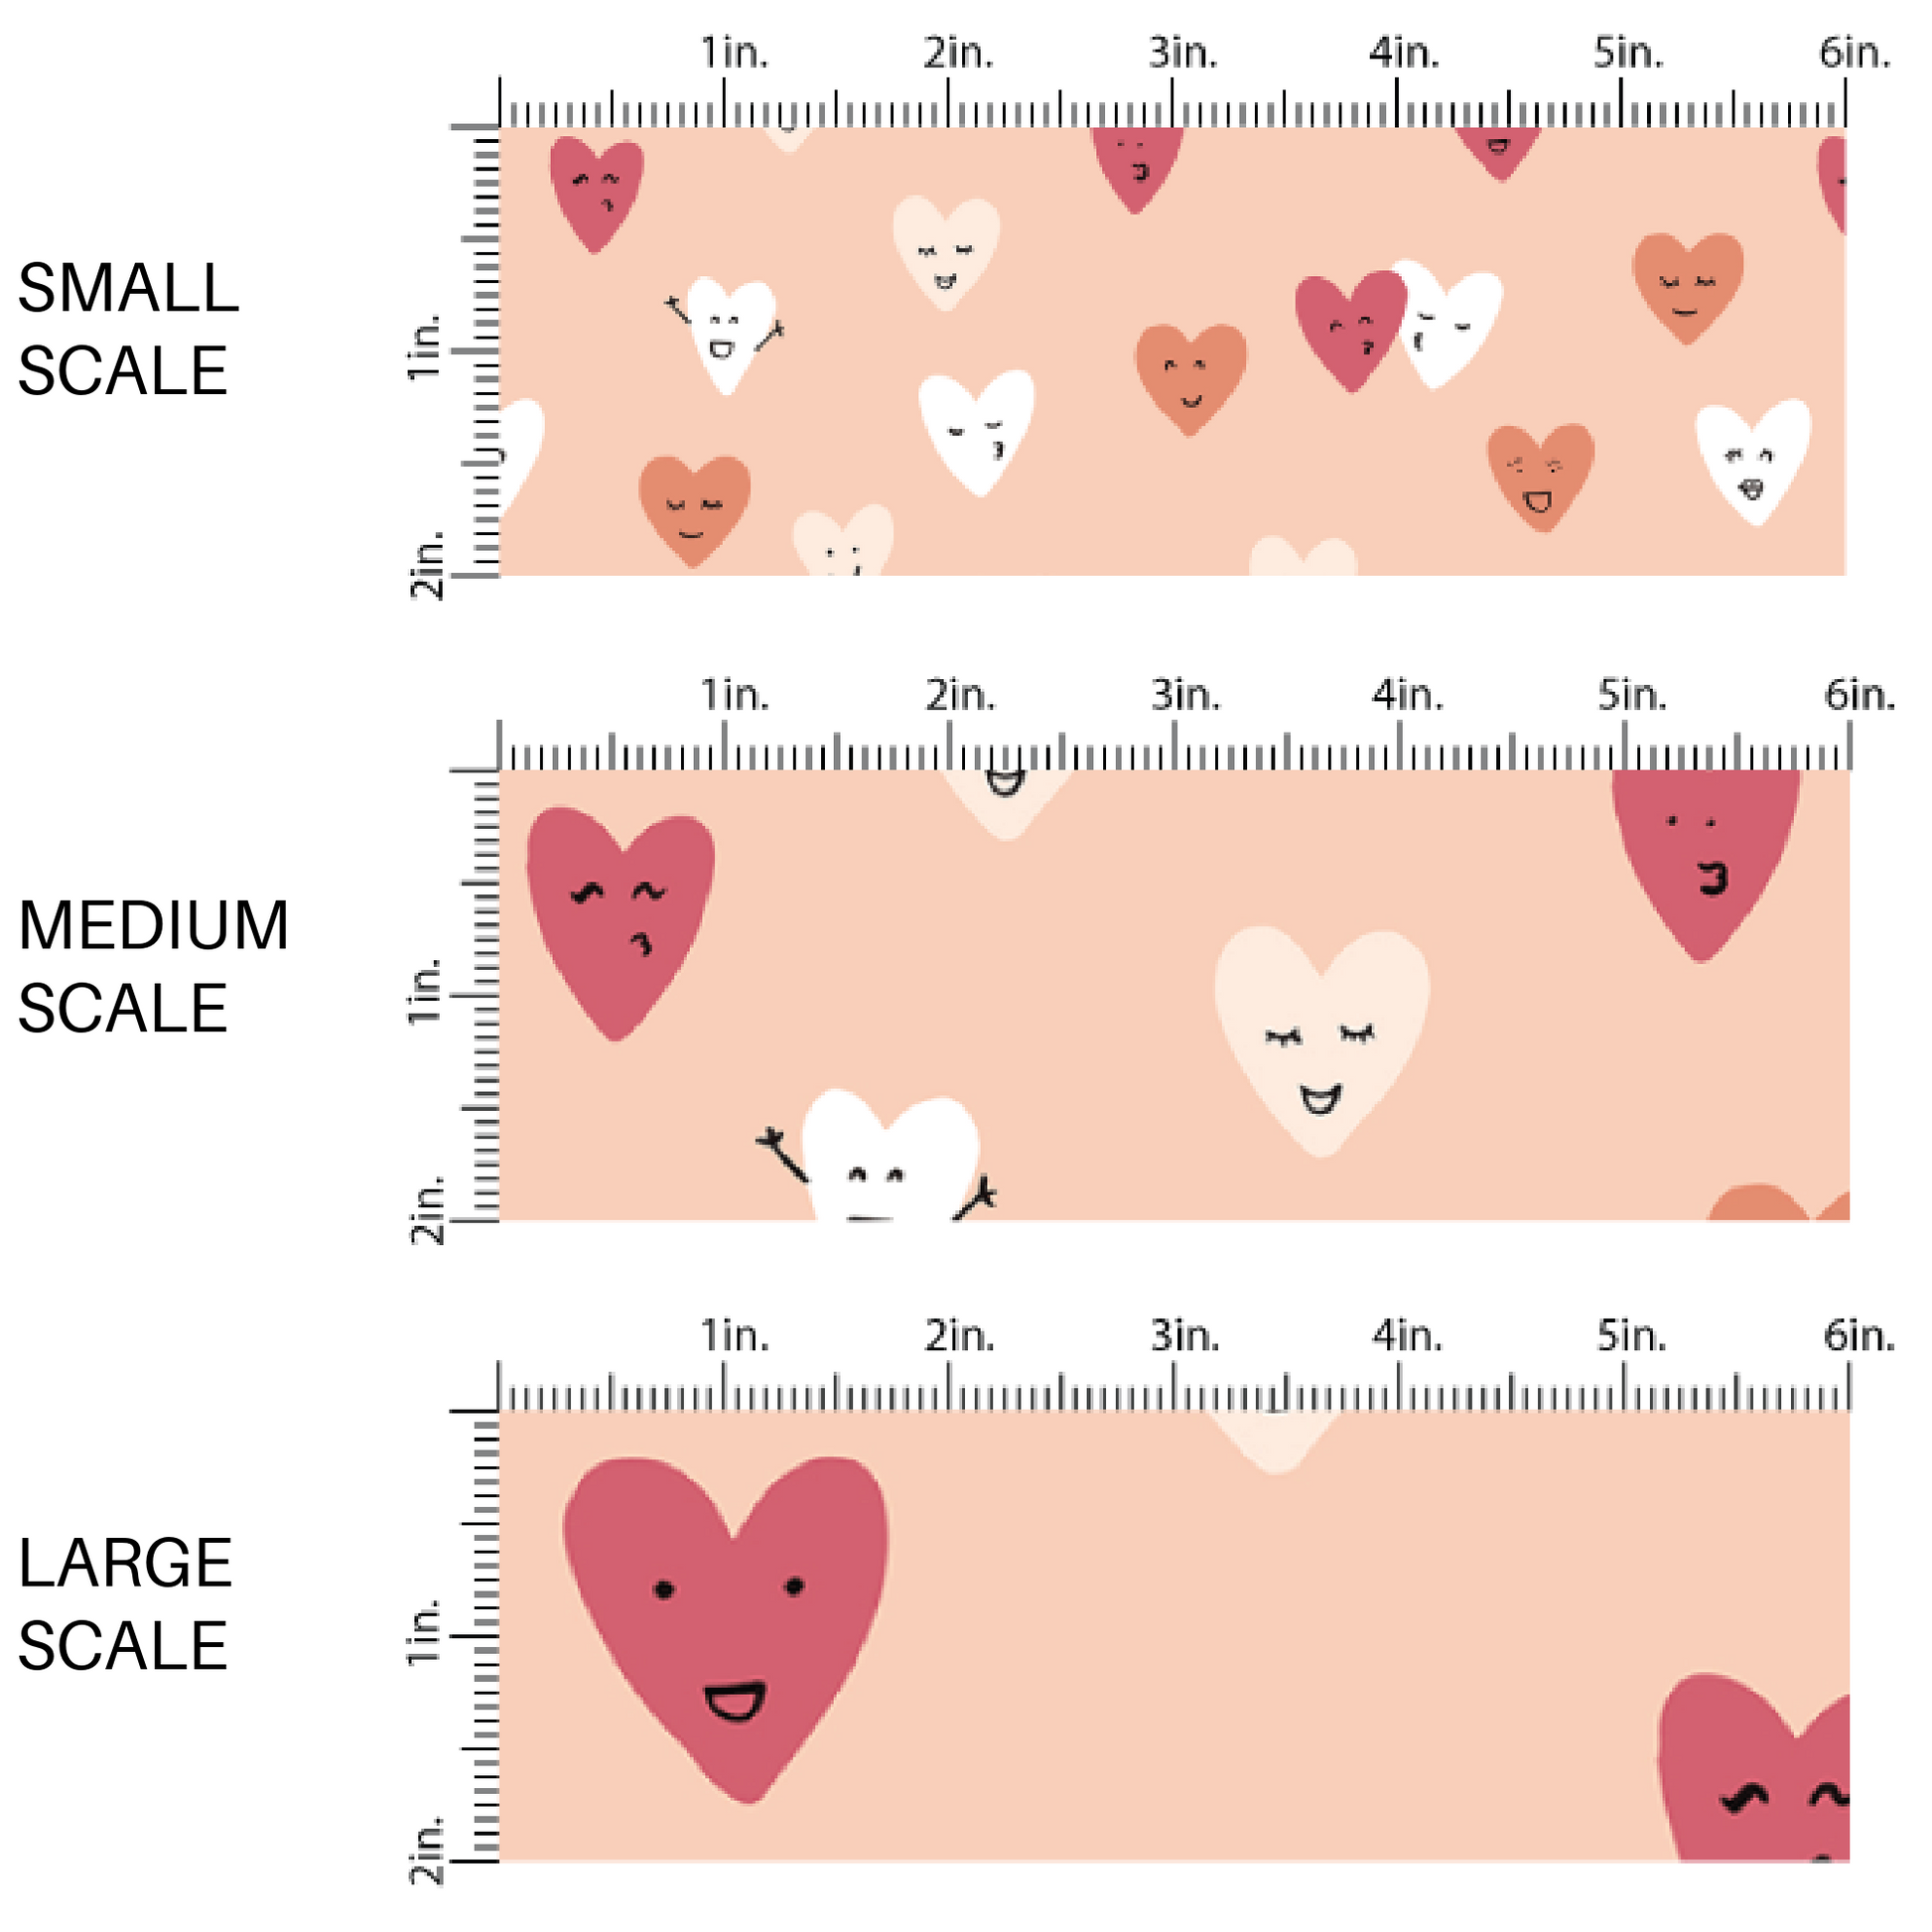 Light Pink Fabric with red and white animated hearts image guide